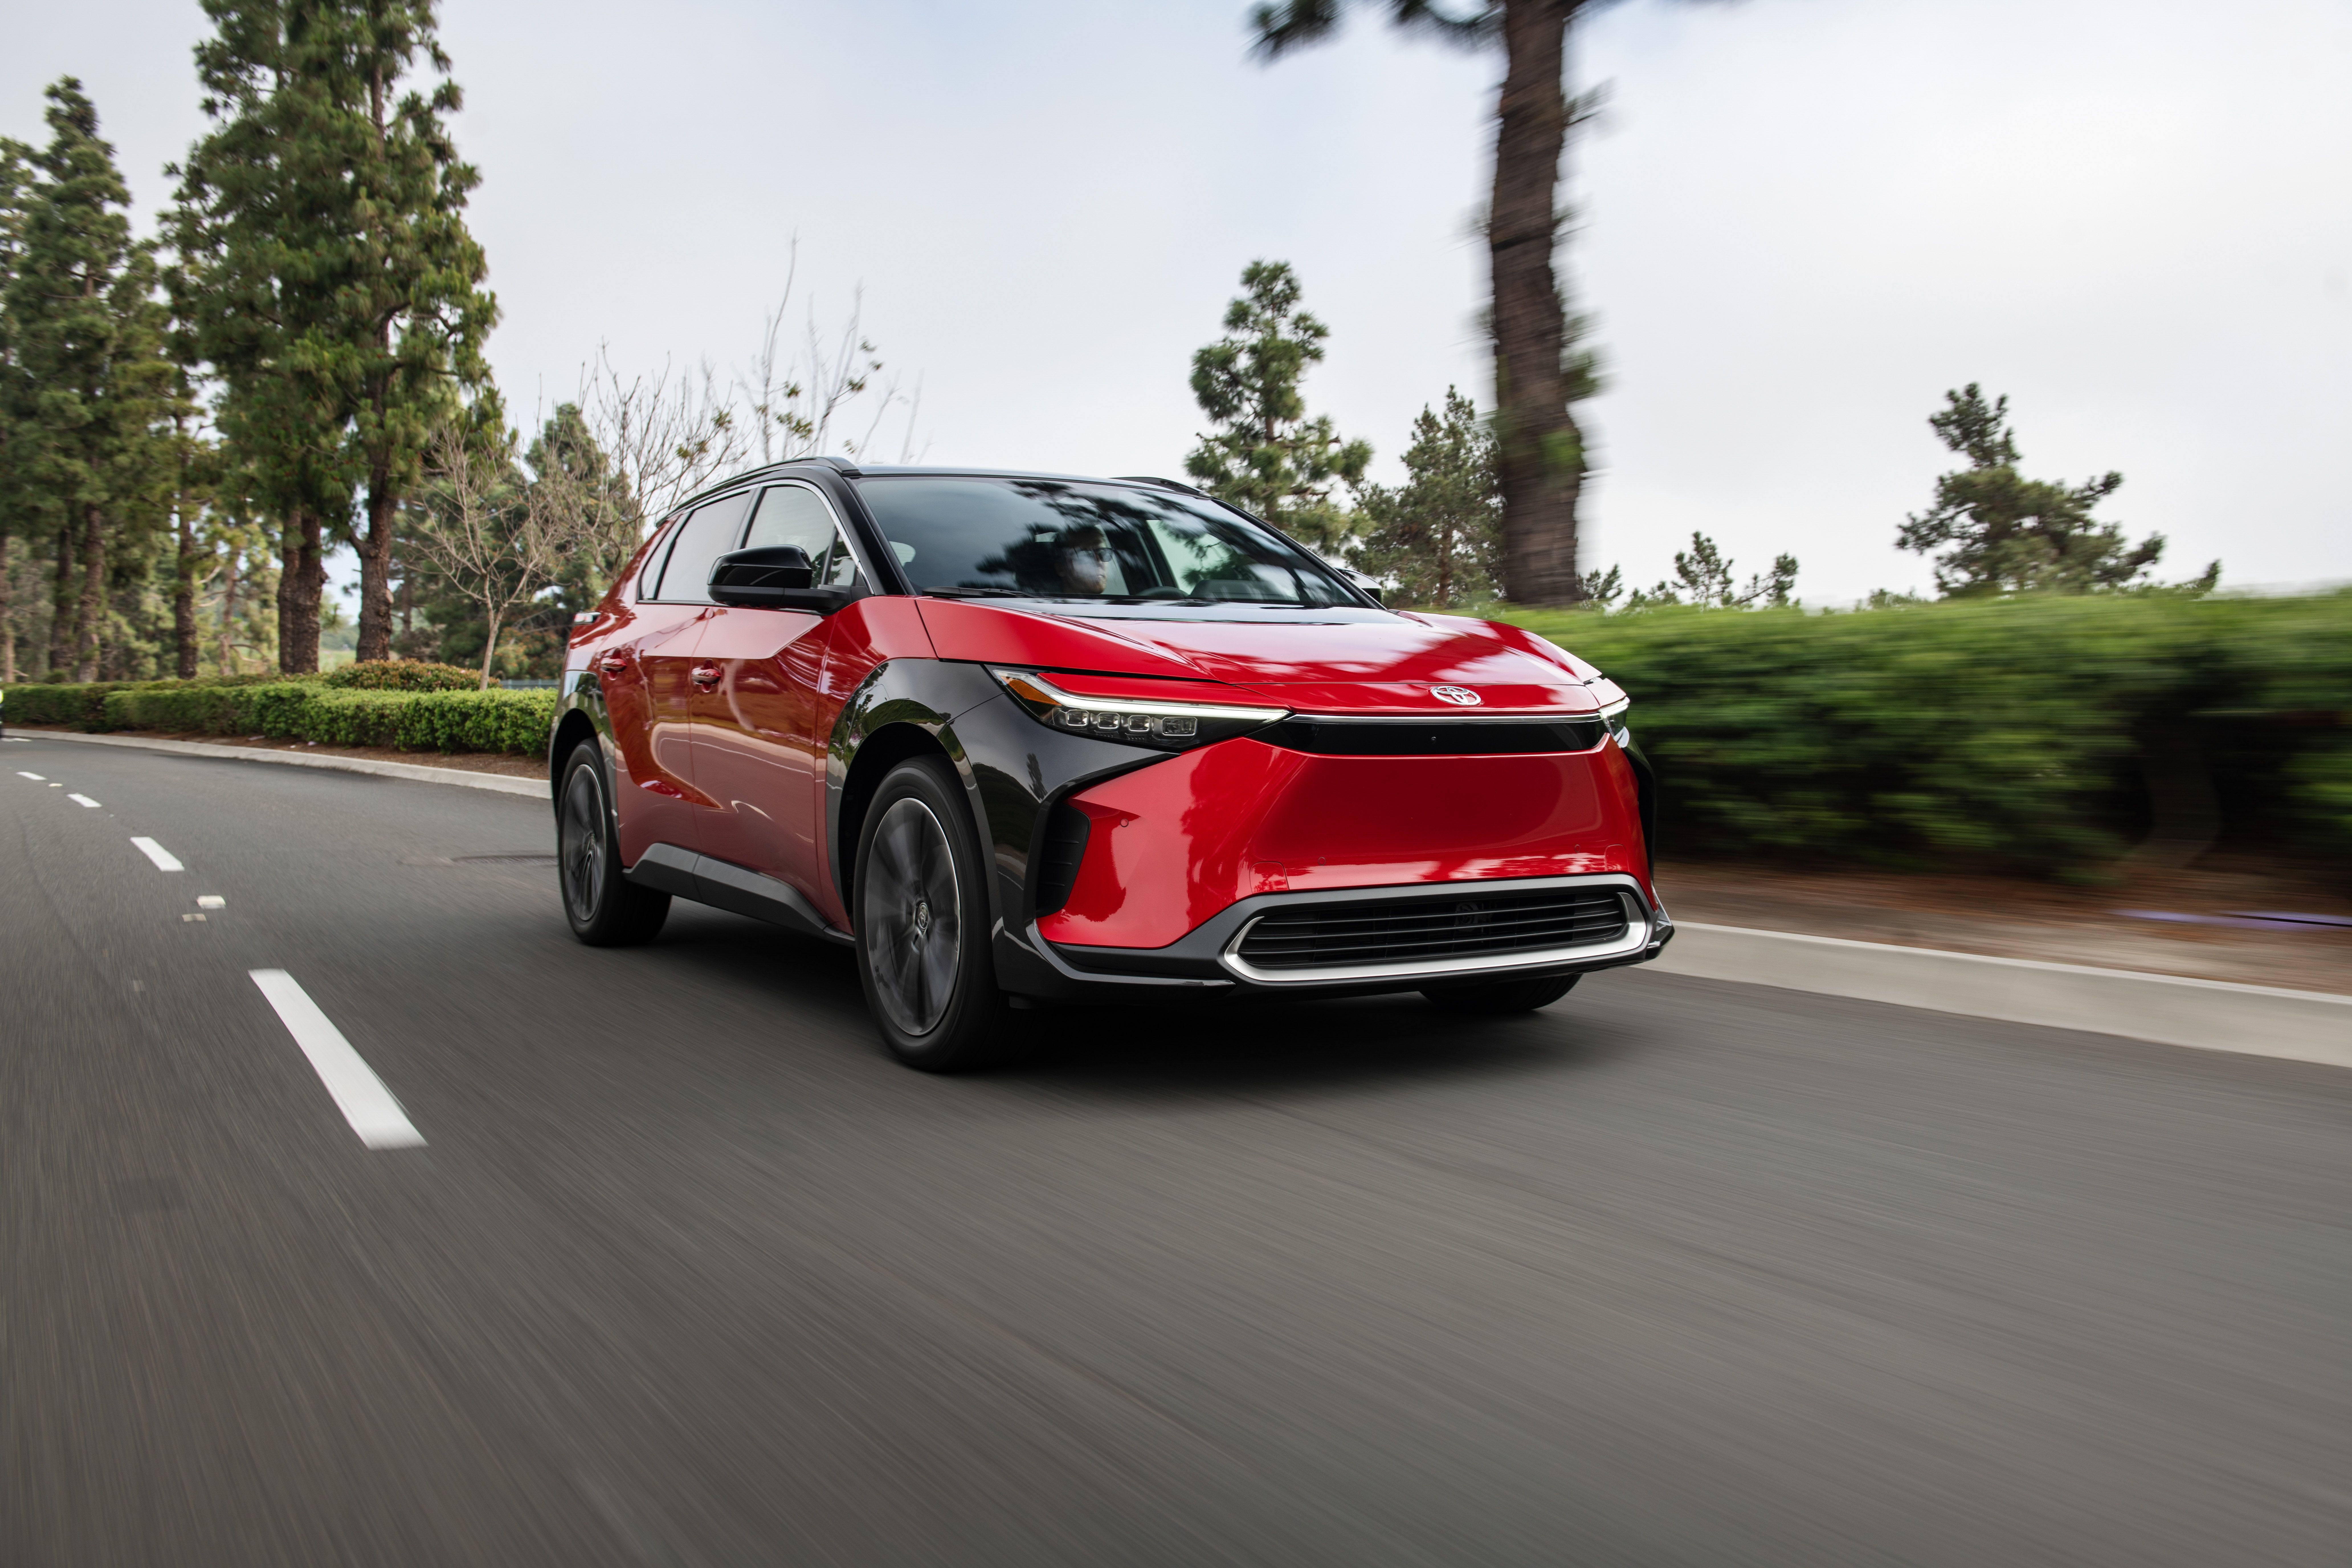 2026 Toyota Compact Cruiser EV: What We Know So Far